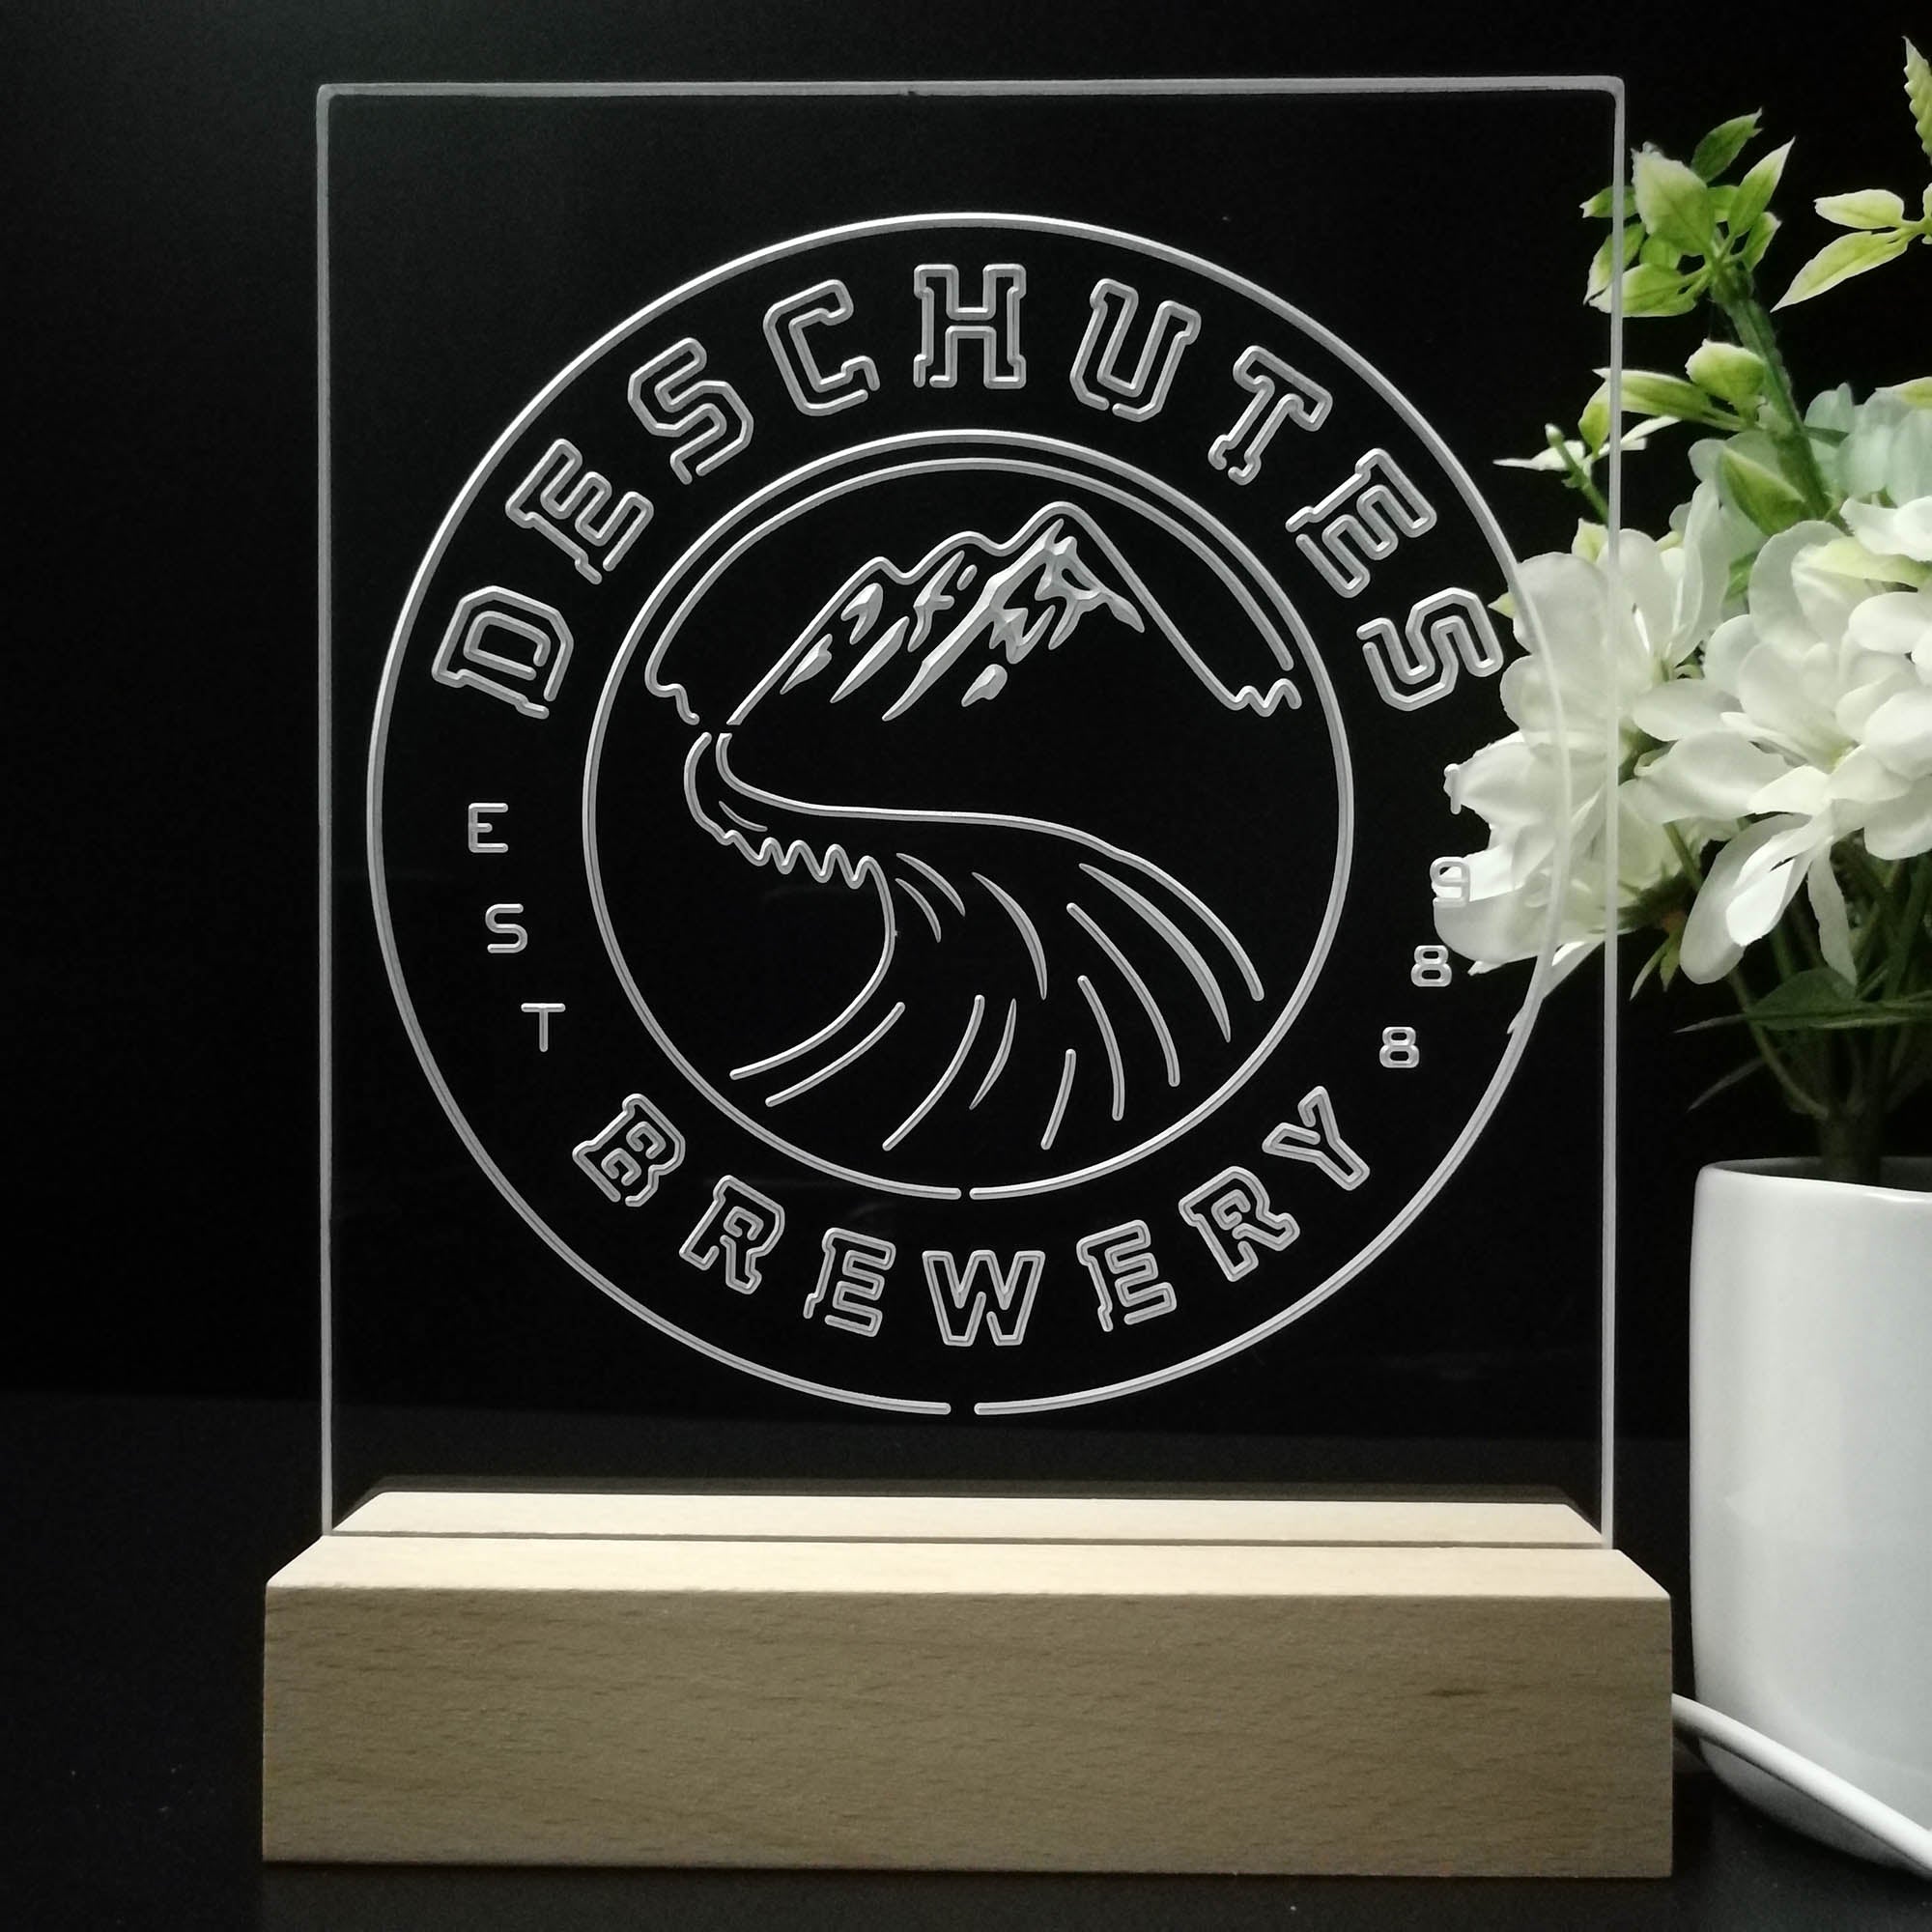 Deschutes Brewery Co. 3D LED Optical Illusion Night Light Table Lamp